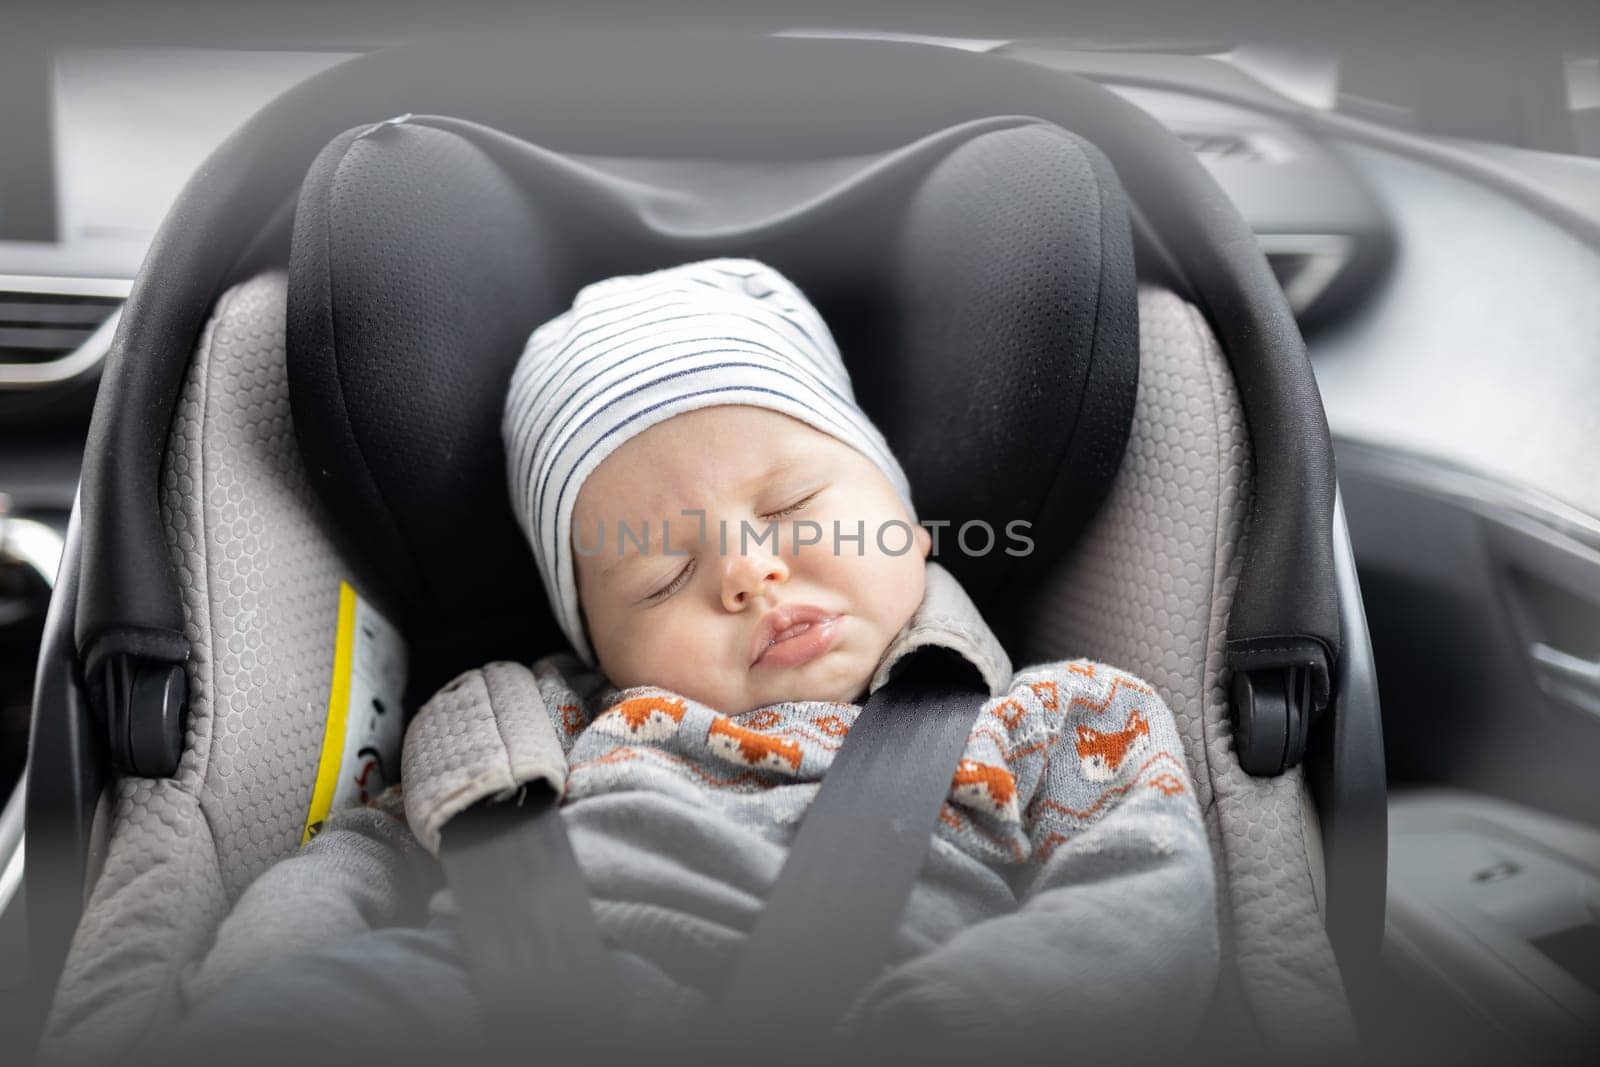 Cute little baby boy sleeping strapped into infant car seat in passenger compartment during car drive